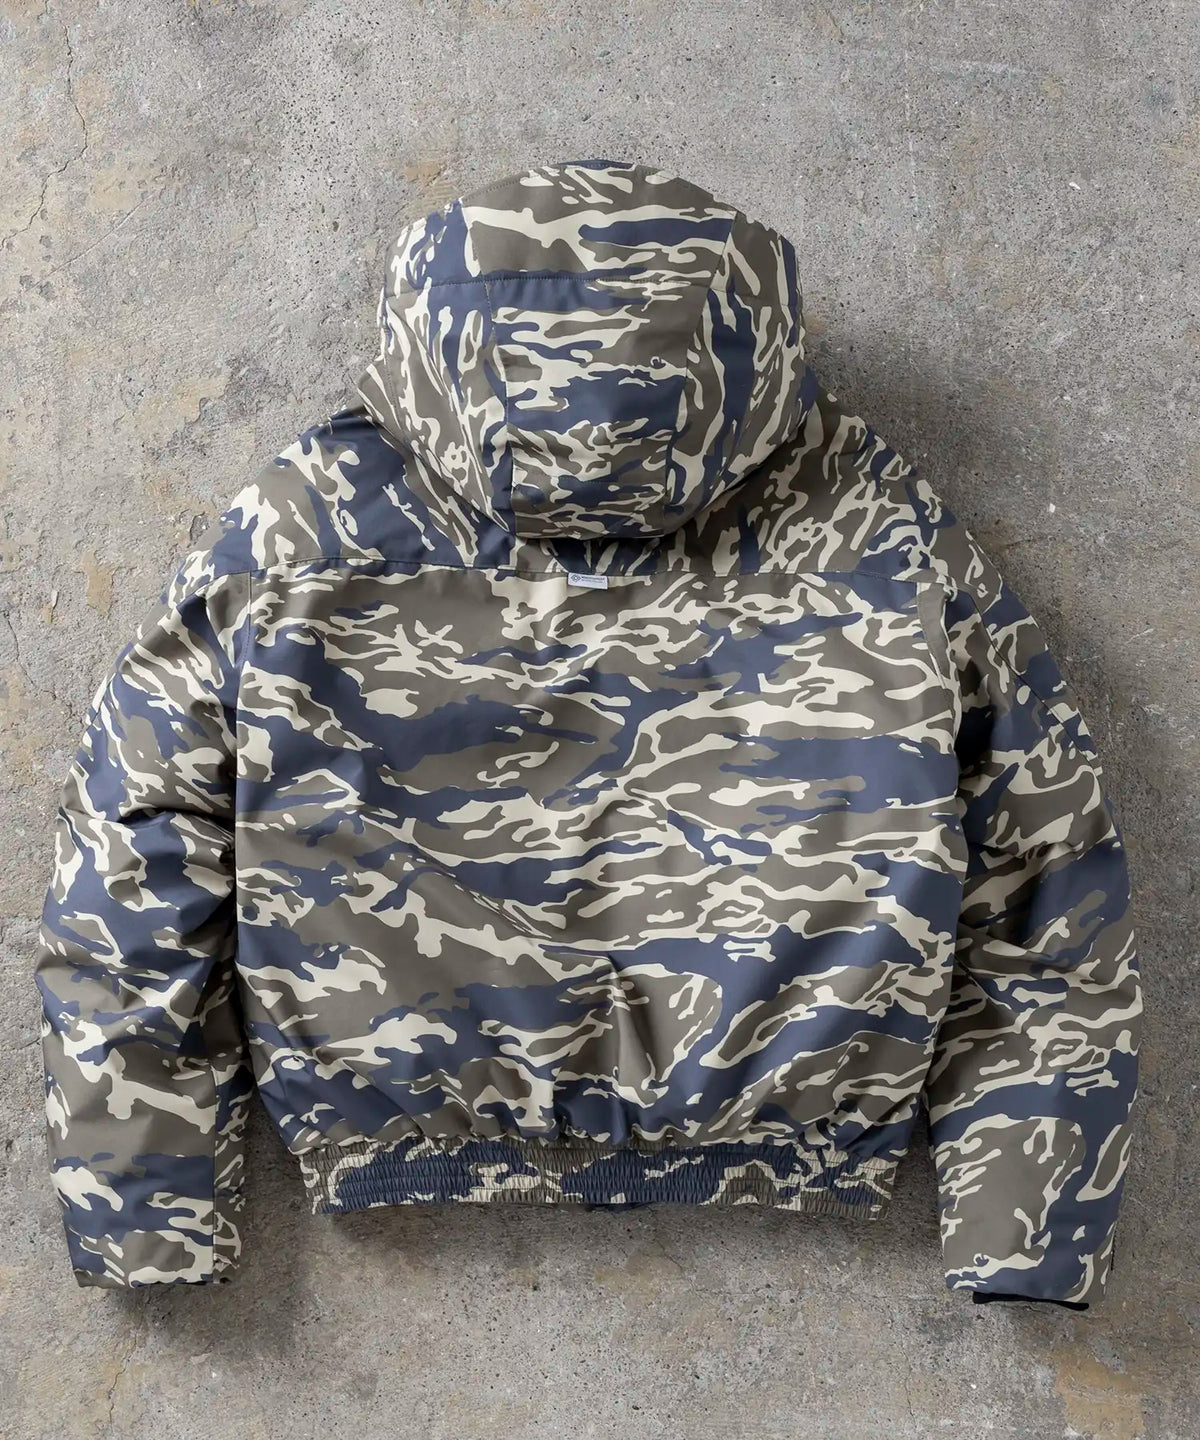 【MENS】GORE DOWN BOMBER JACKET / WINDSTOPPER(R) プロダクト BY GORE‑TEX LABS 2023年10月下旬お届け